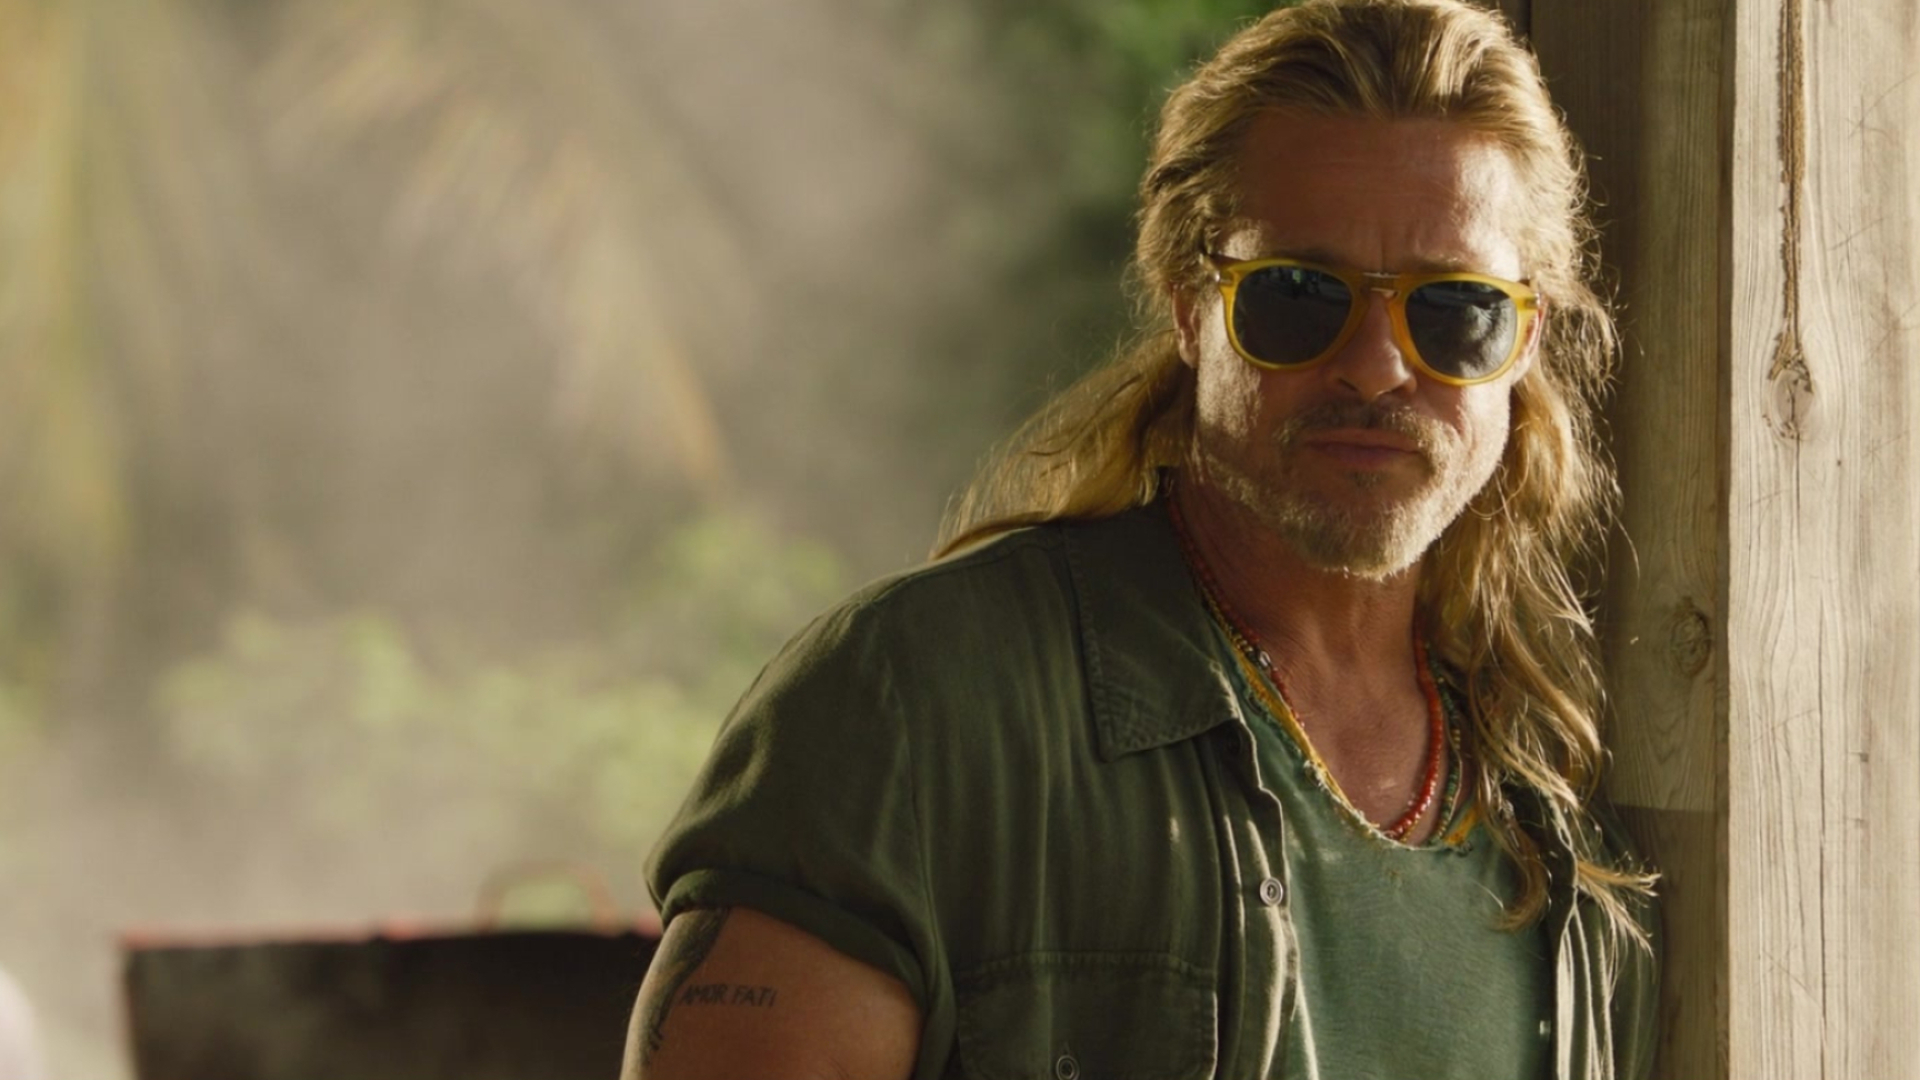 The Lost City (2022): Brad Pitt made a cameo appearance in the film as a fictional version of himself. 1920x1080 Full HD Background.